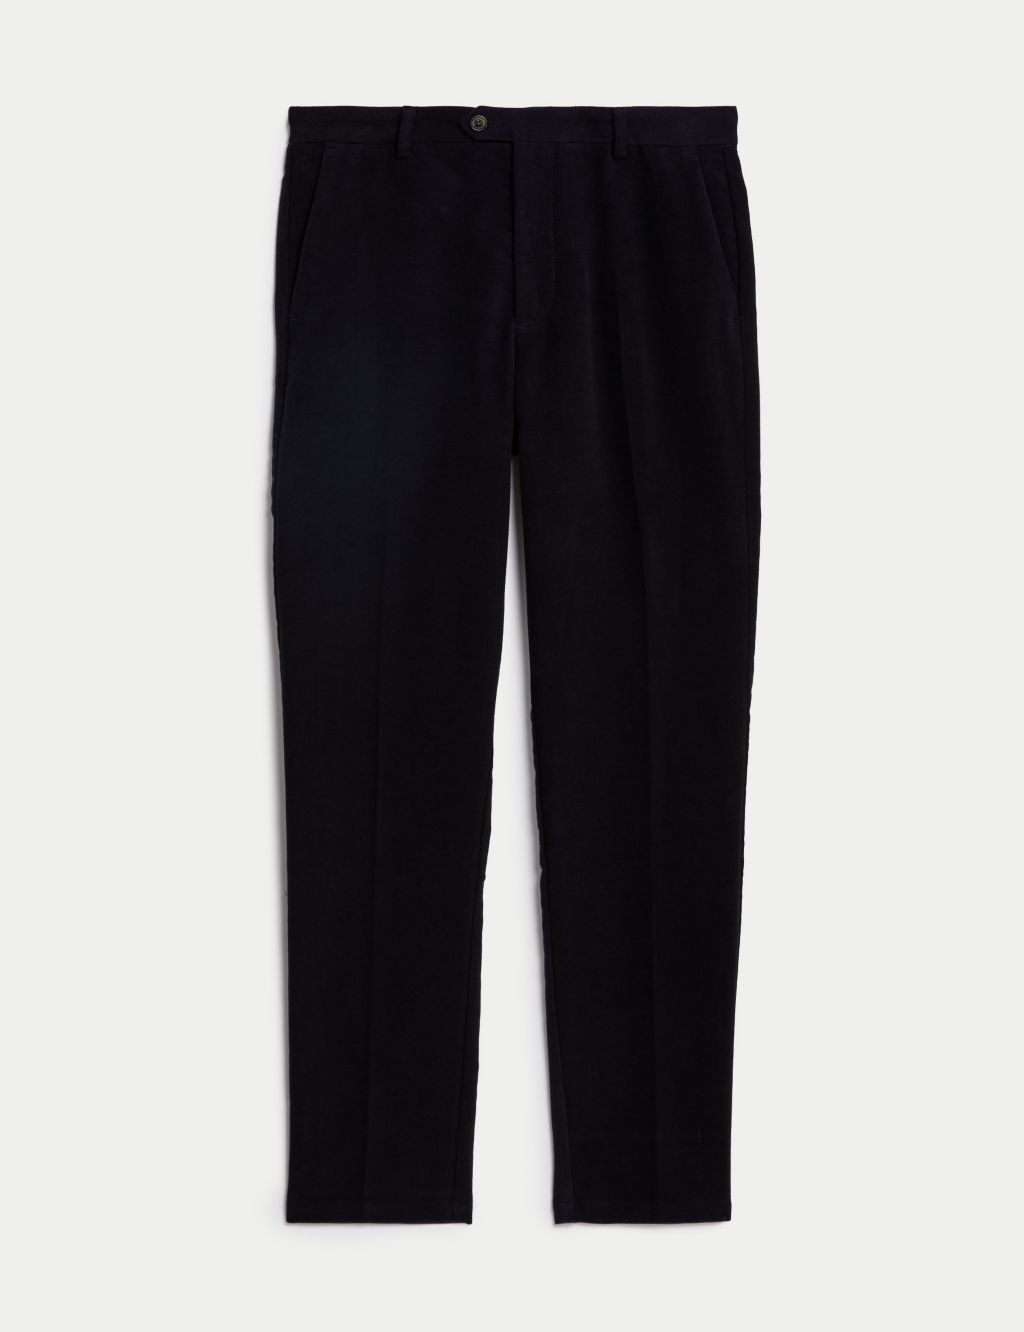 Page 2 - Men's Tapered-Fit Trousers | M&S